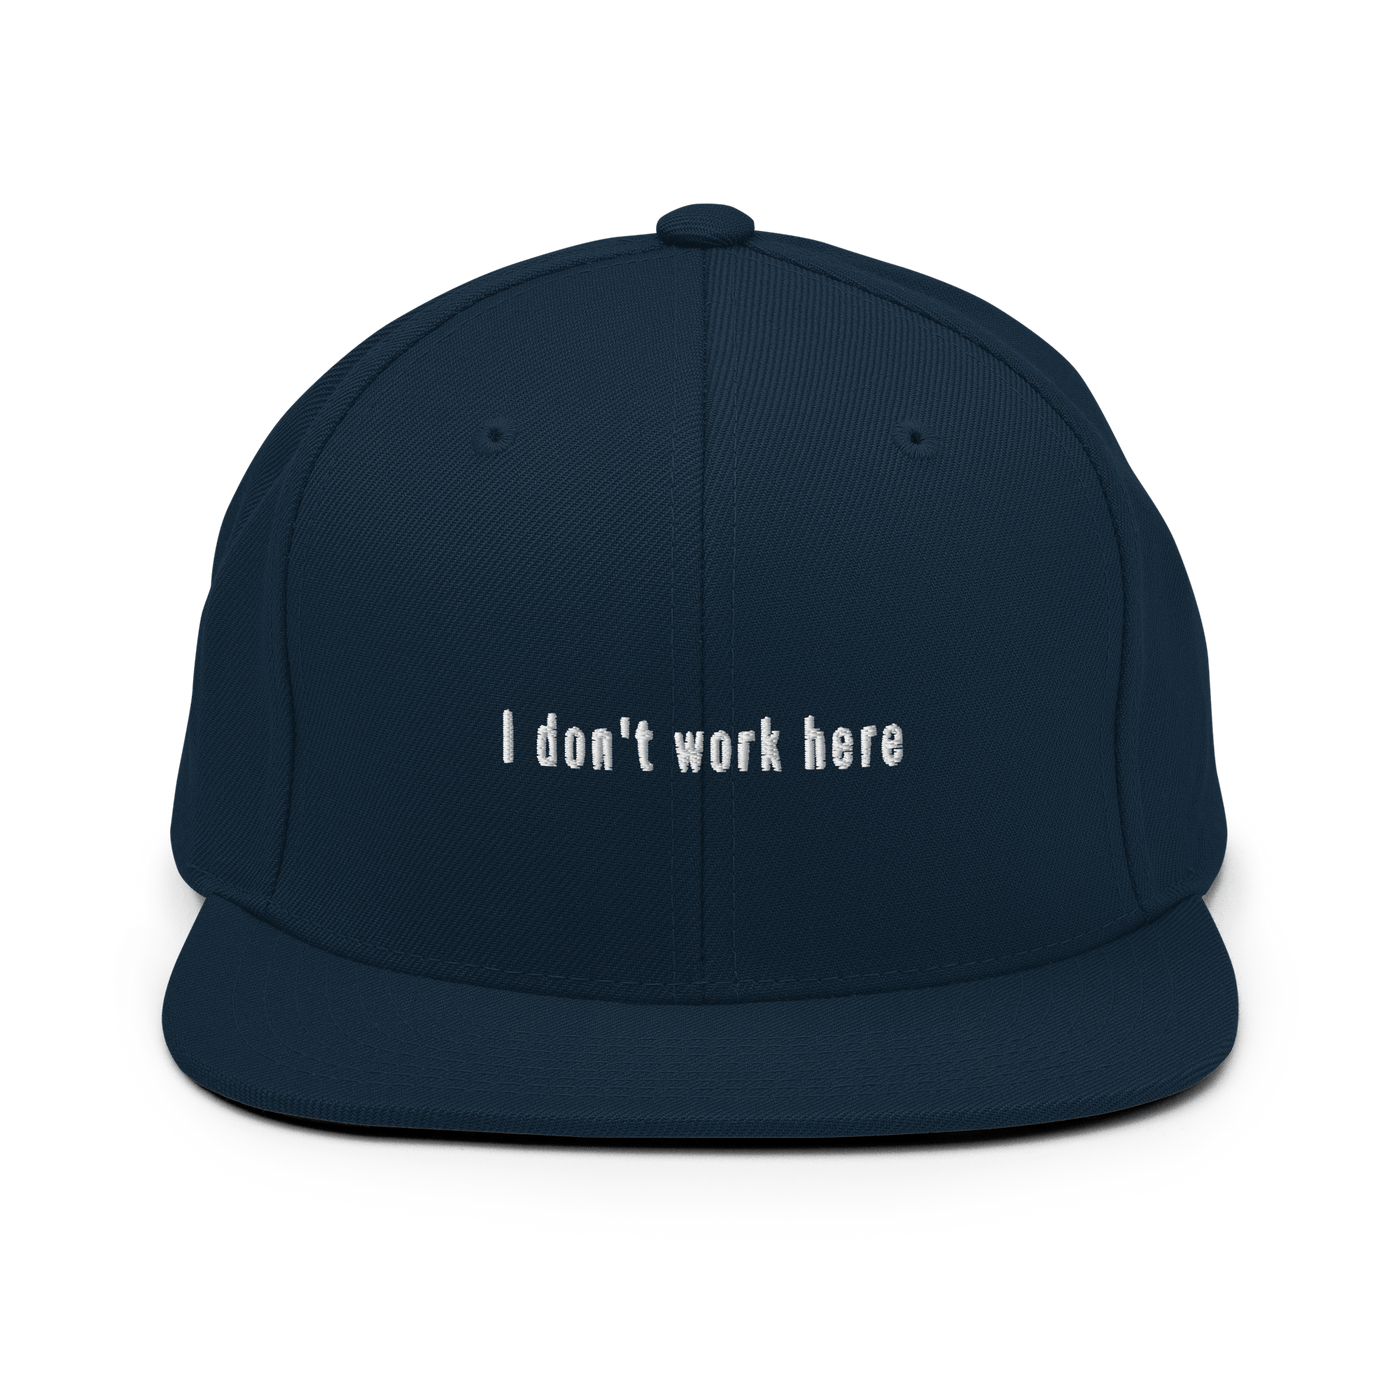 I don't work here Snapback Hat - Dark Navy - - Just Another Cap Store